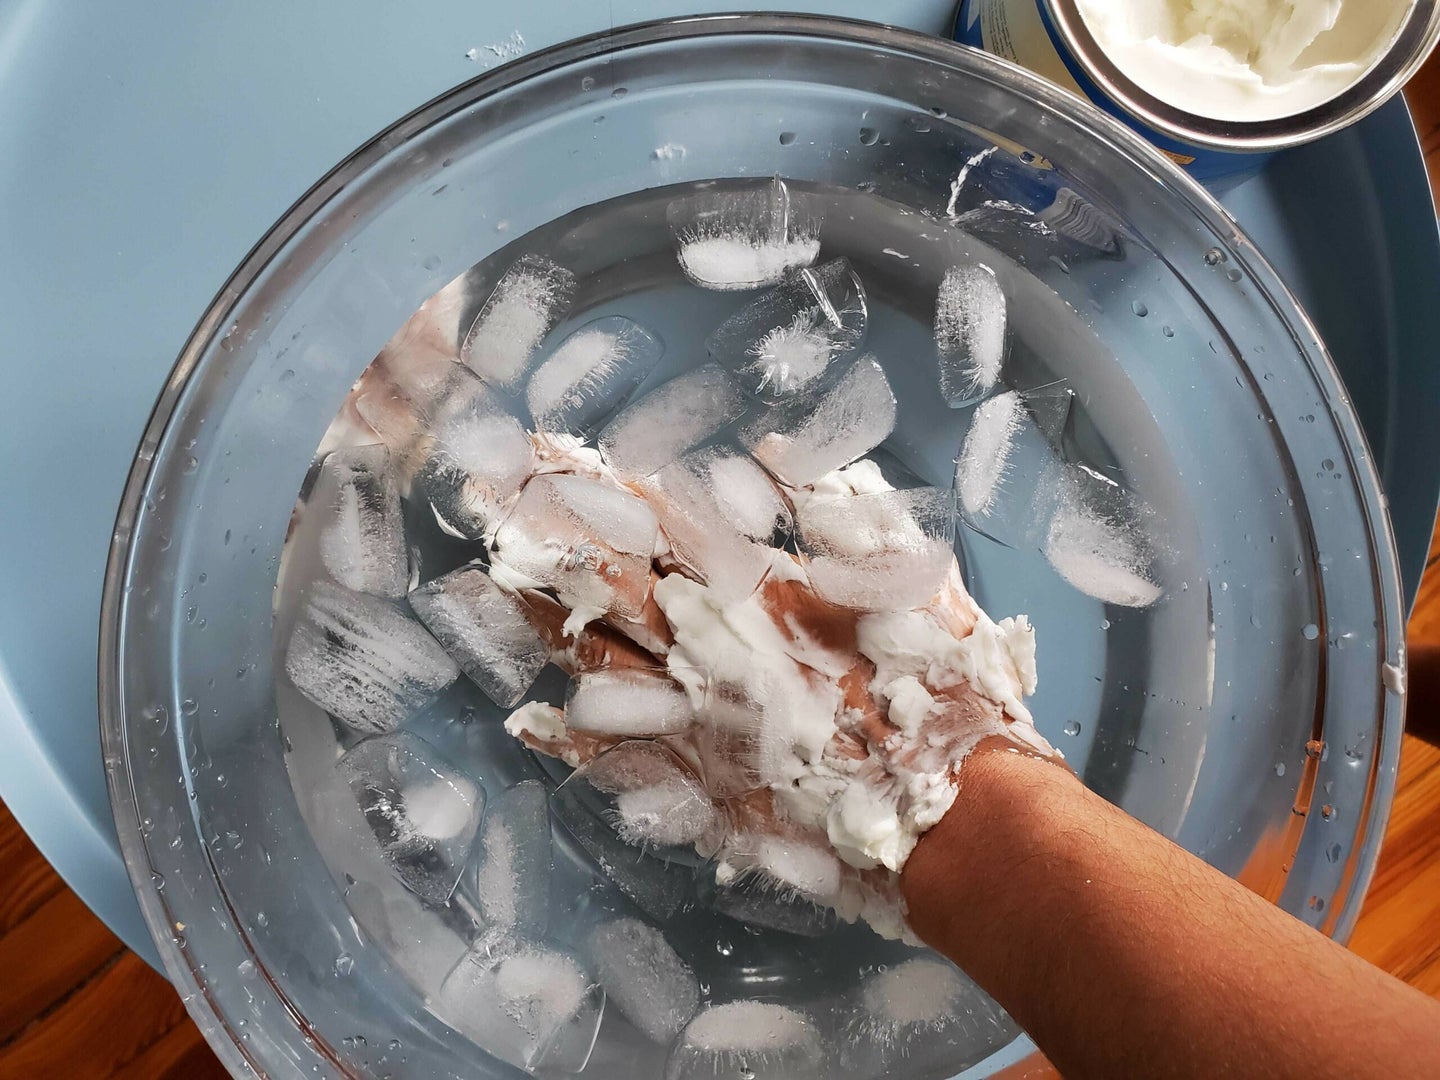 Dipping shortening-covered hands in ice water